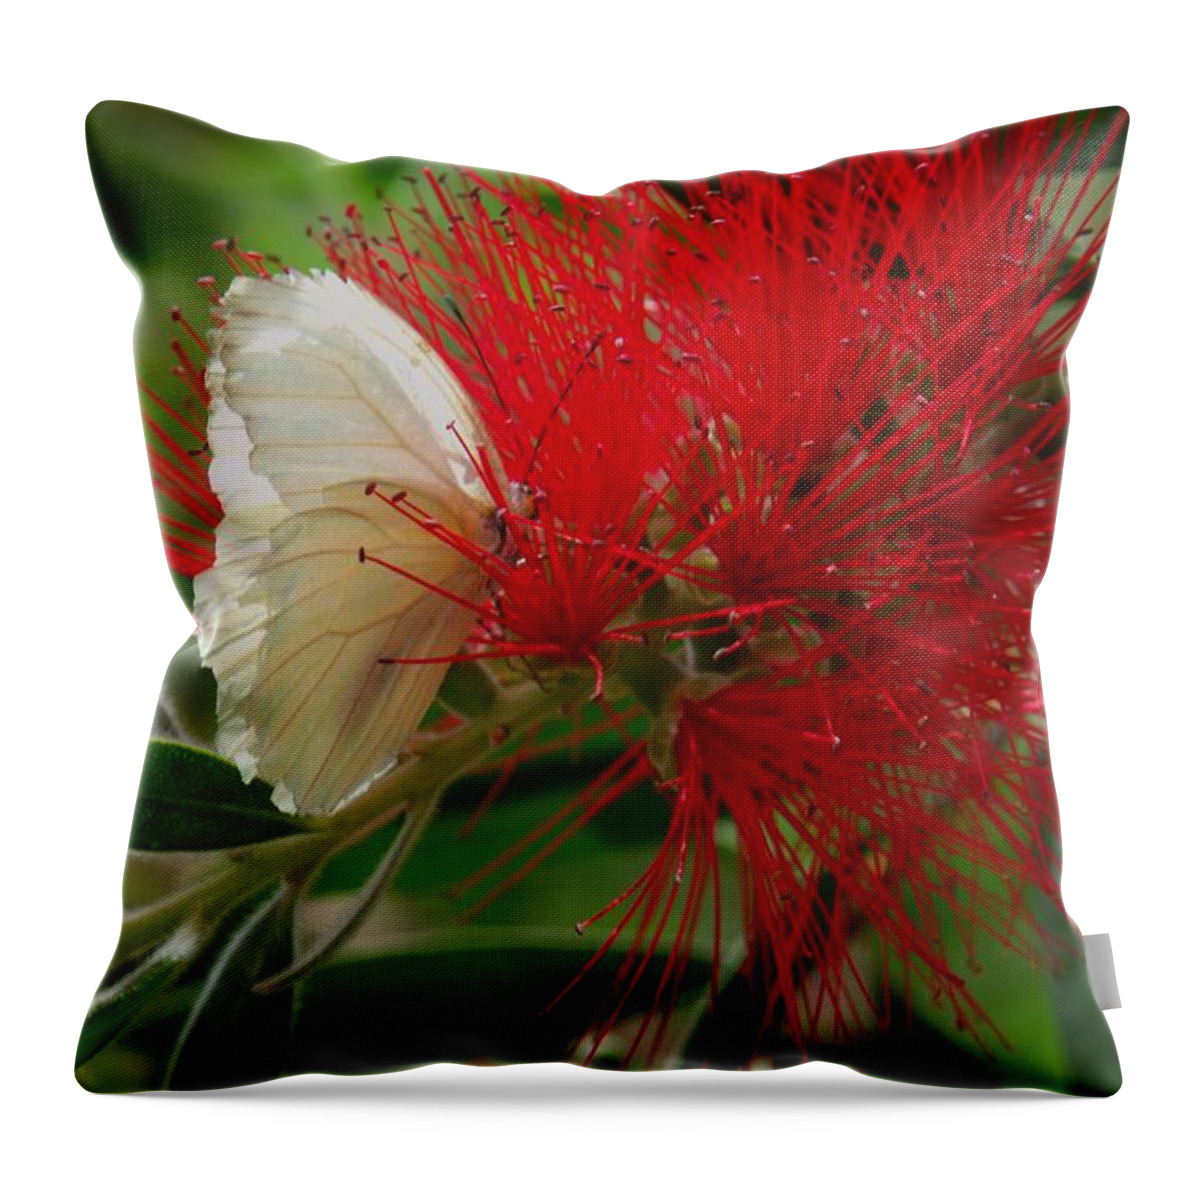  Throw Pillow featuring the photograph White Butterfly by Desert Serenity